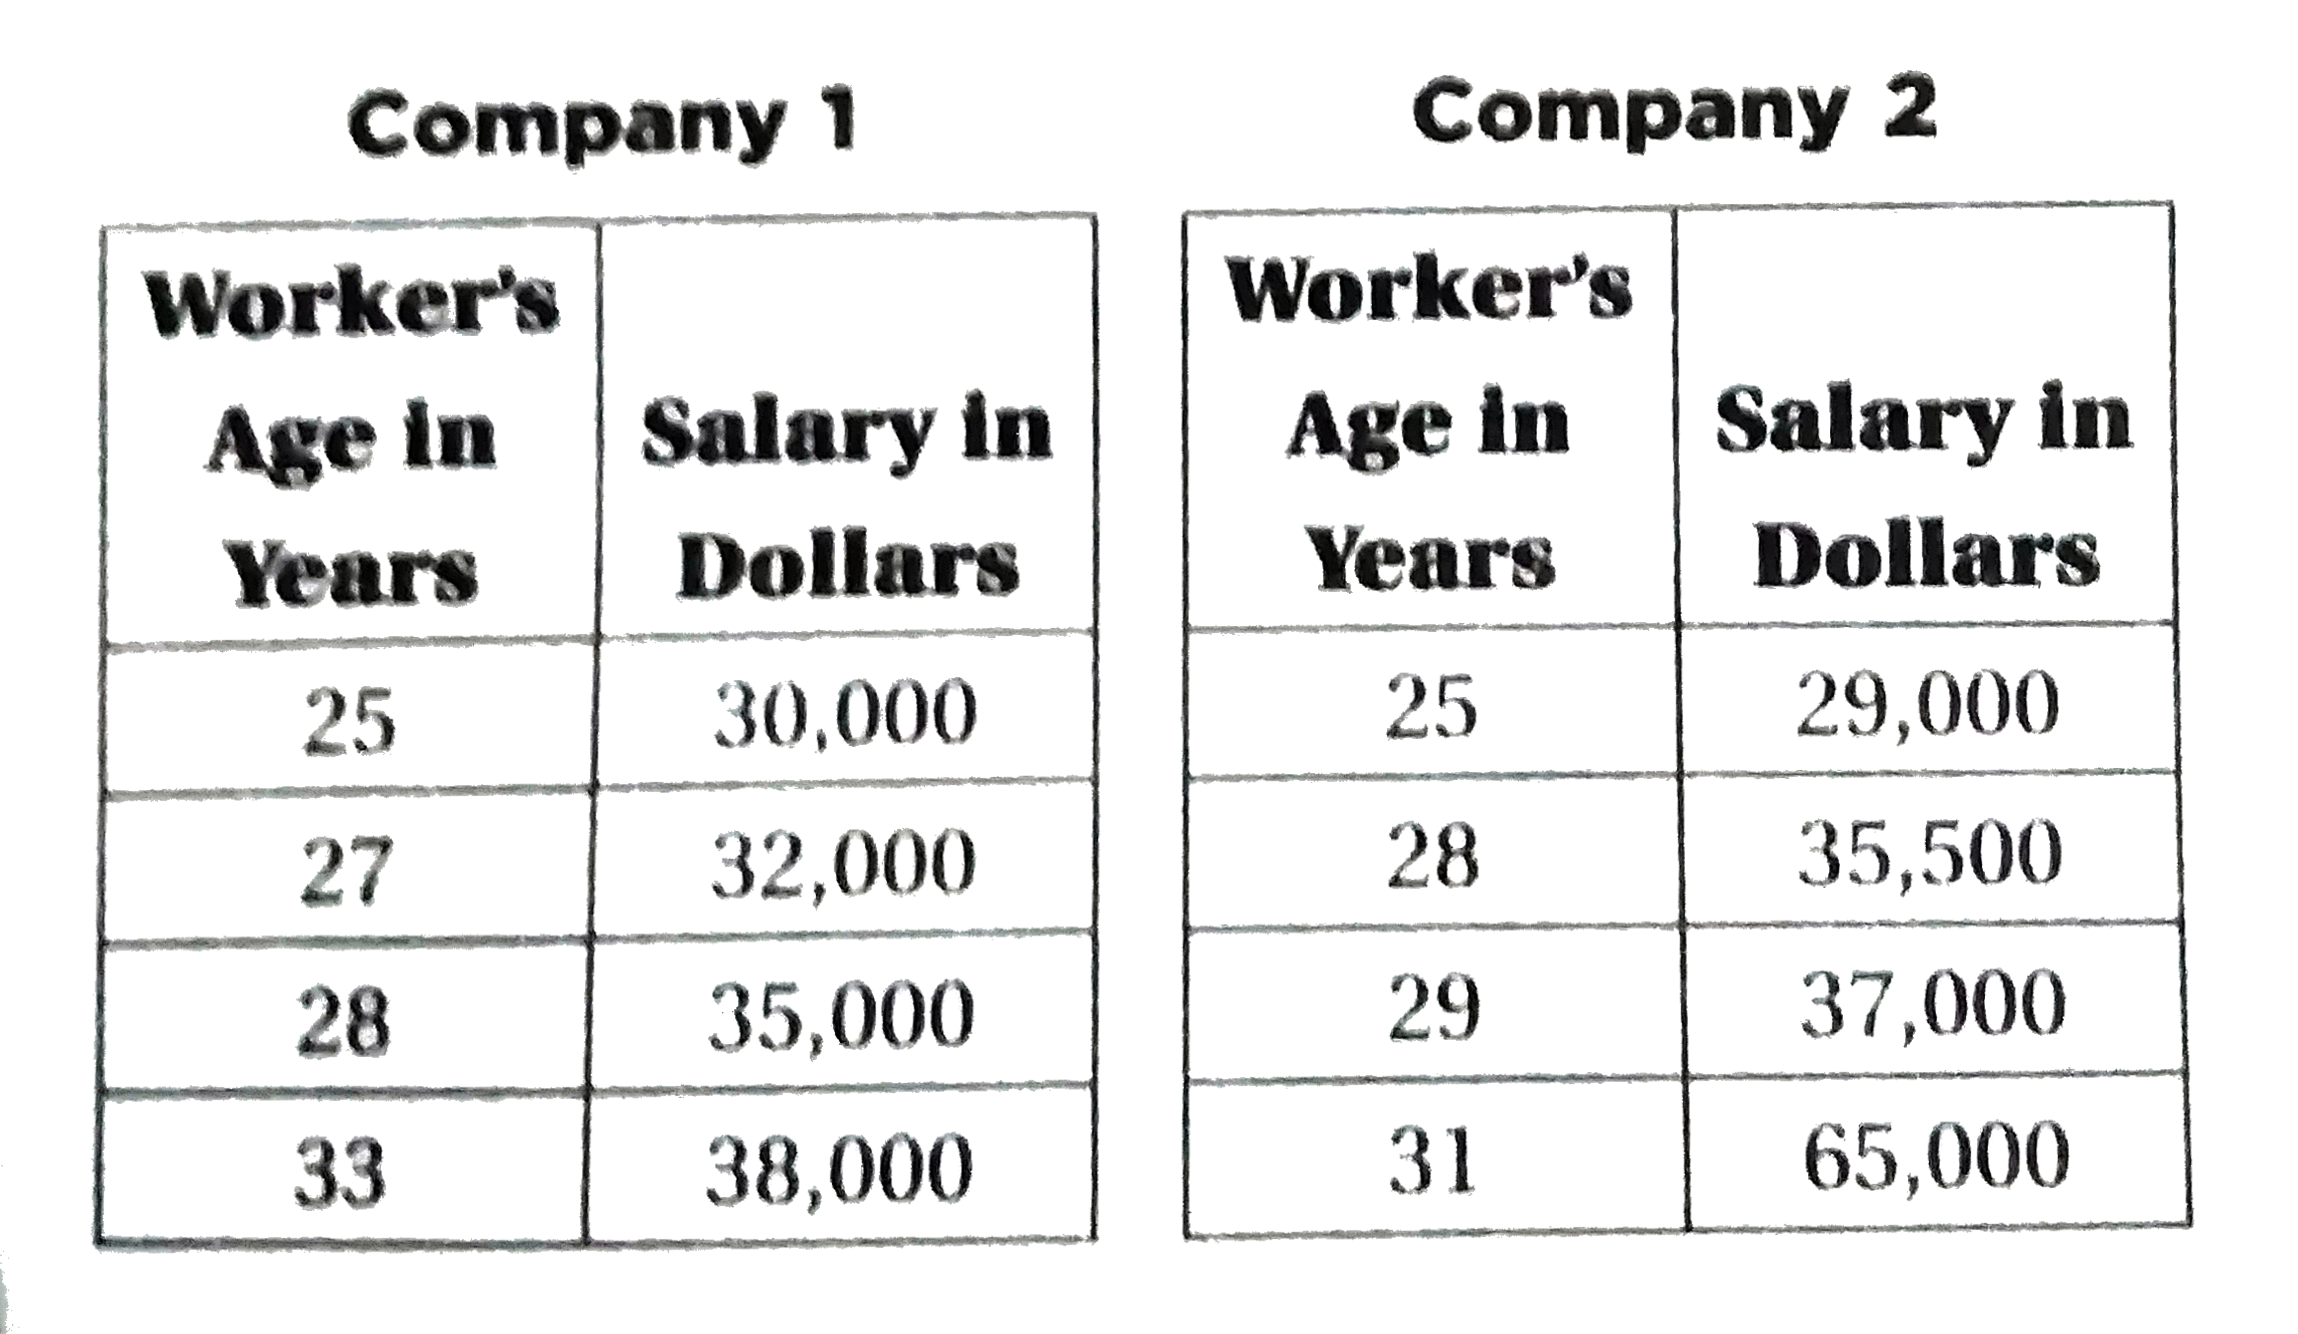 Which of the following statements is true about the data in the tables above?   I. The mean salaries for both companies are greater than $35,000.    II. The mean age of workers in Comapy 1 is greater than the mean age of workers in Company 2.   III. The salary range in Company 2 is greater than the salary range in Company 1.